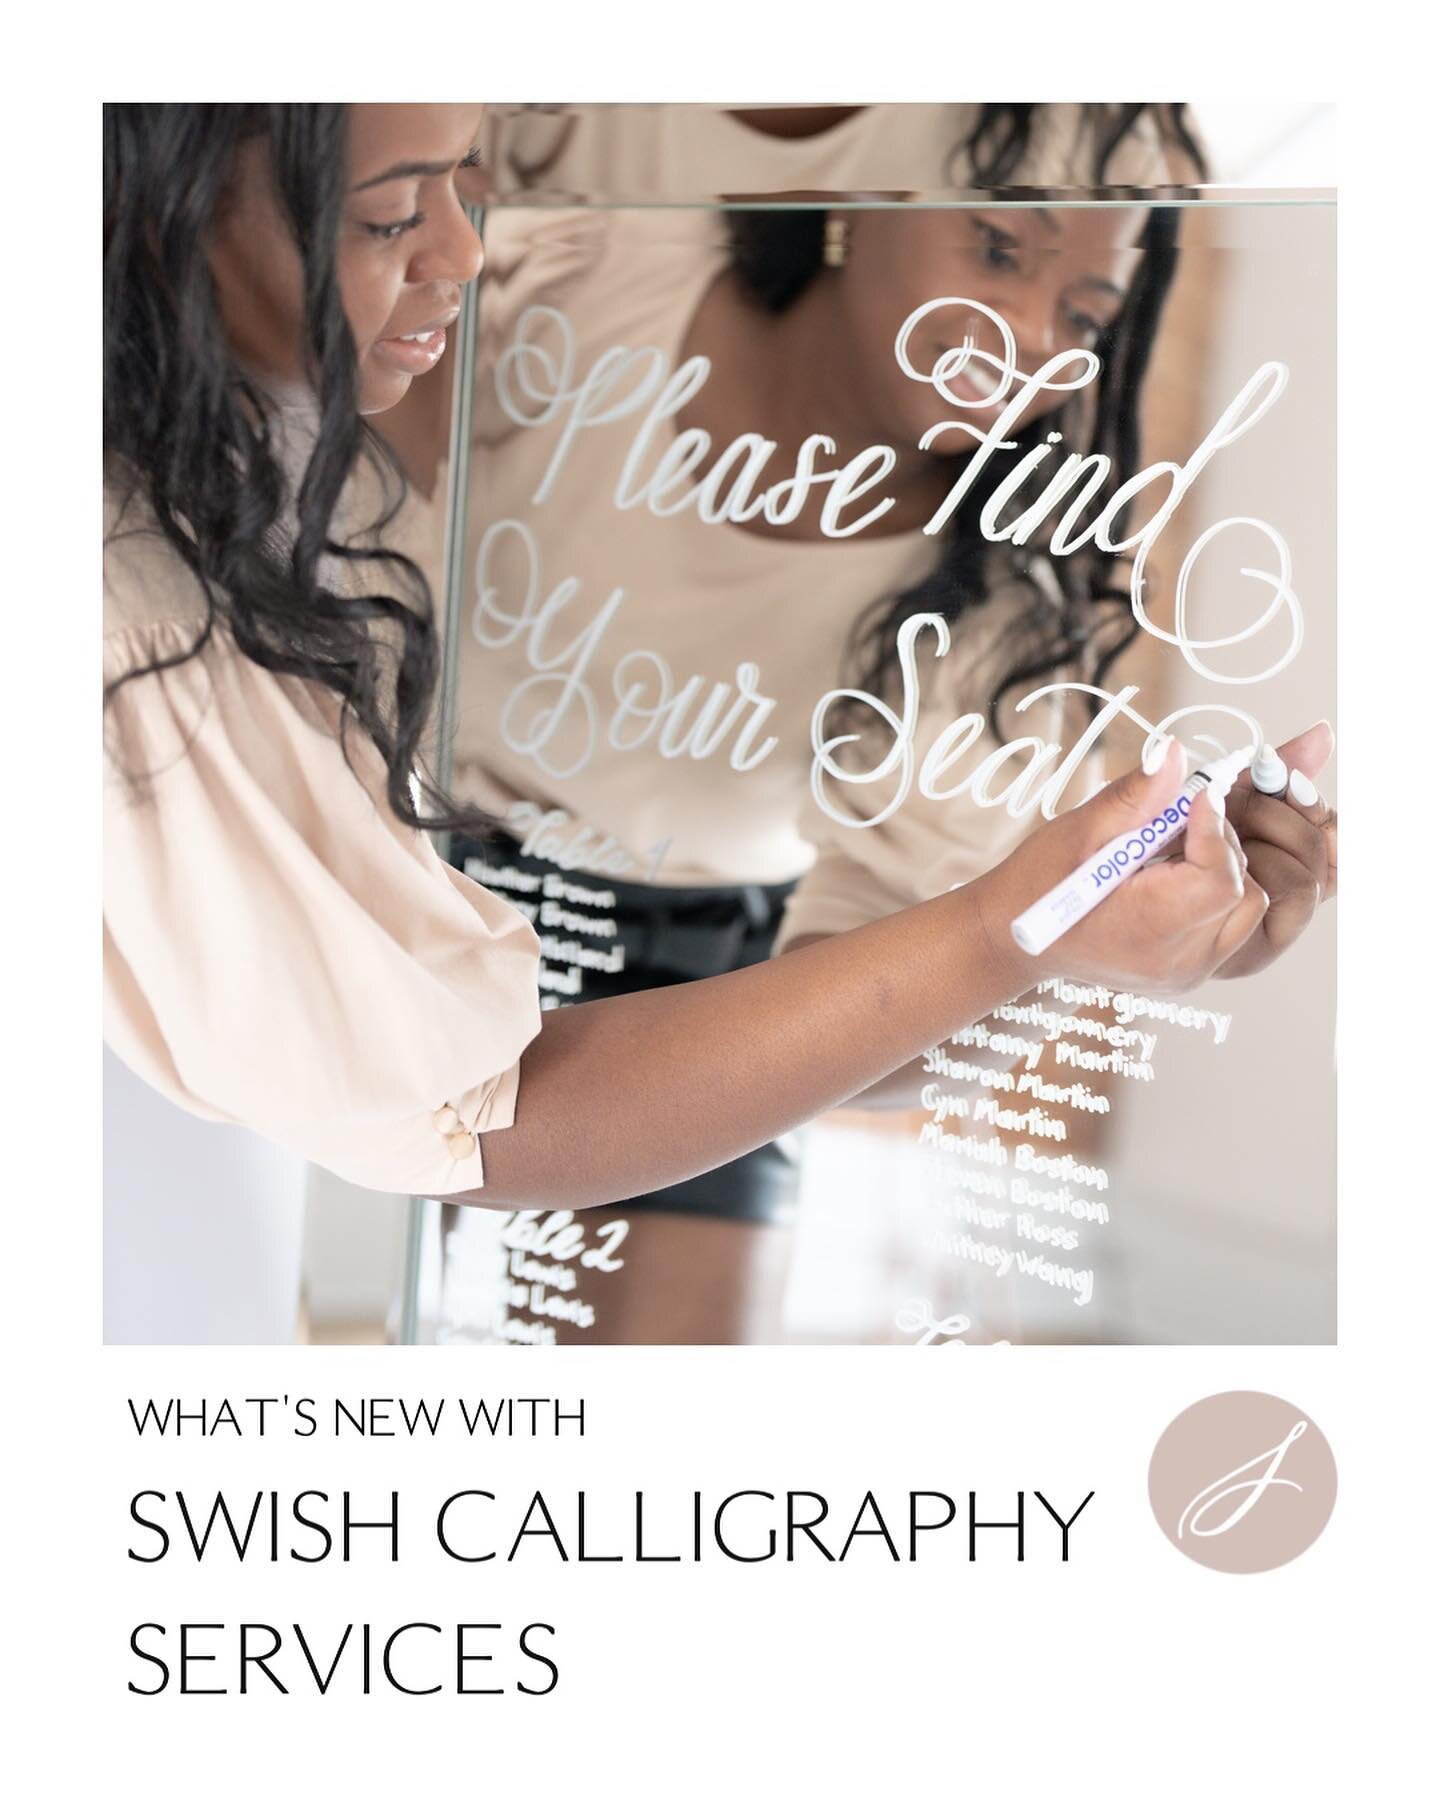 ✨NEW BEGINNINGS✨ SAVANNAH, GEORGIA IS MY NEW HOME!

I look forward to connecting with local Savannah, GA event vendors and clients! I am thankful to continue serving clients across the US!

Read the following Swish Calligraphy updates:

✨PLACE CARDS 